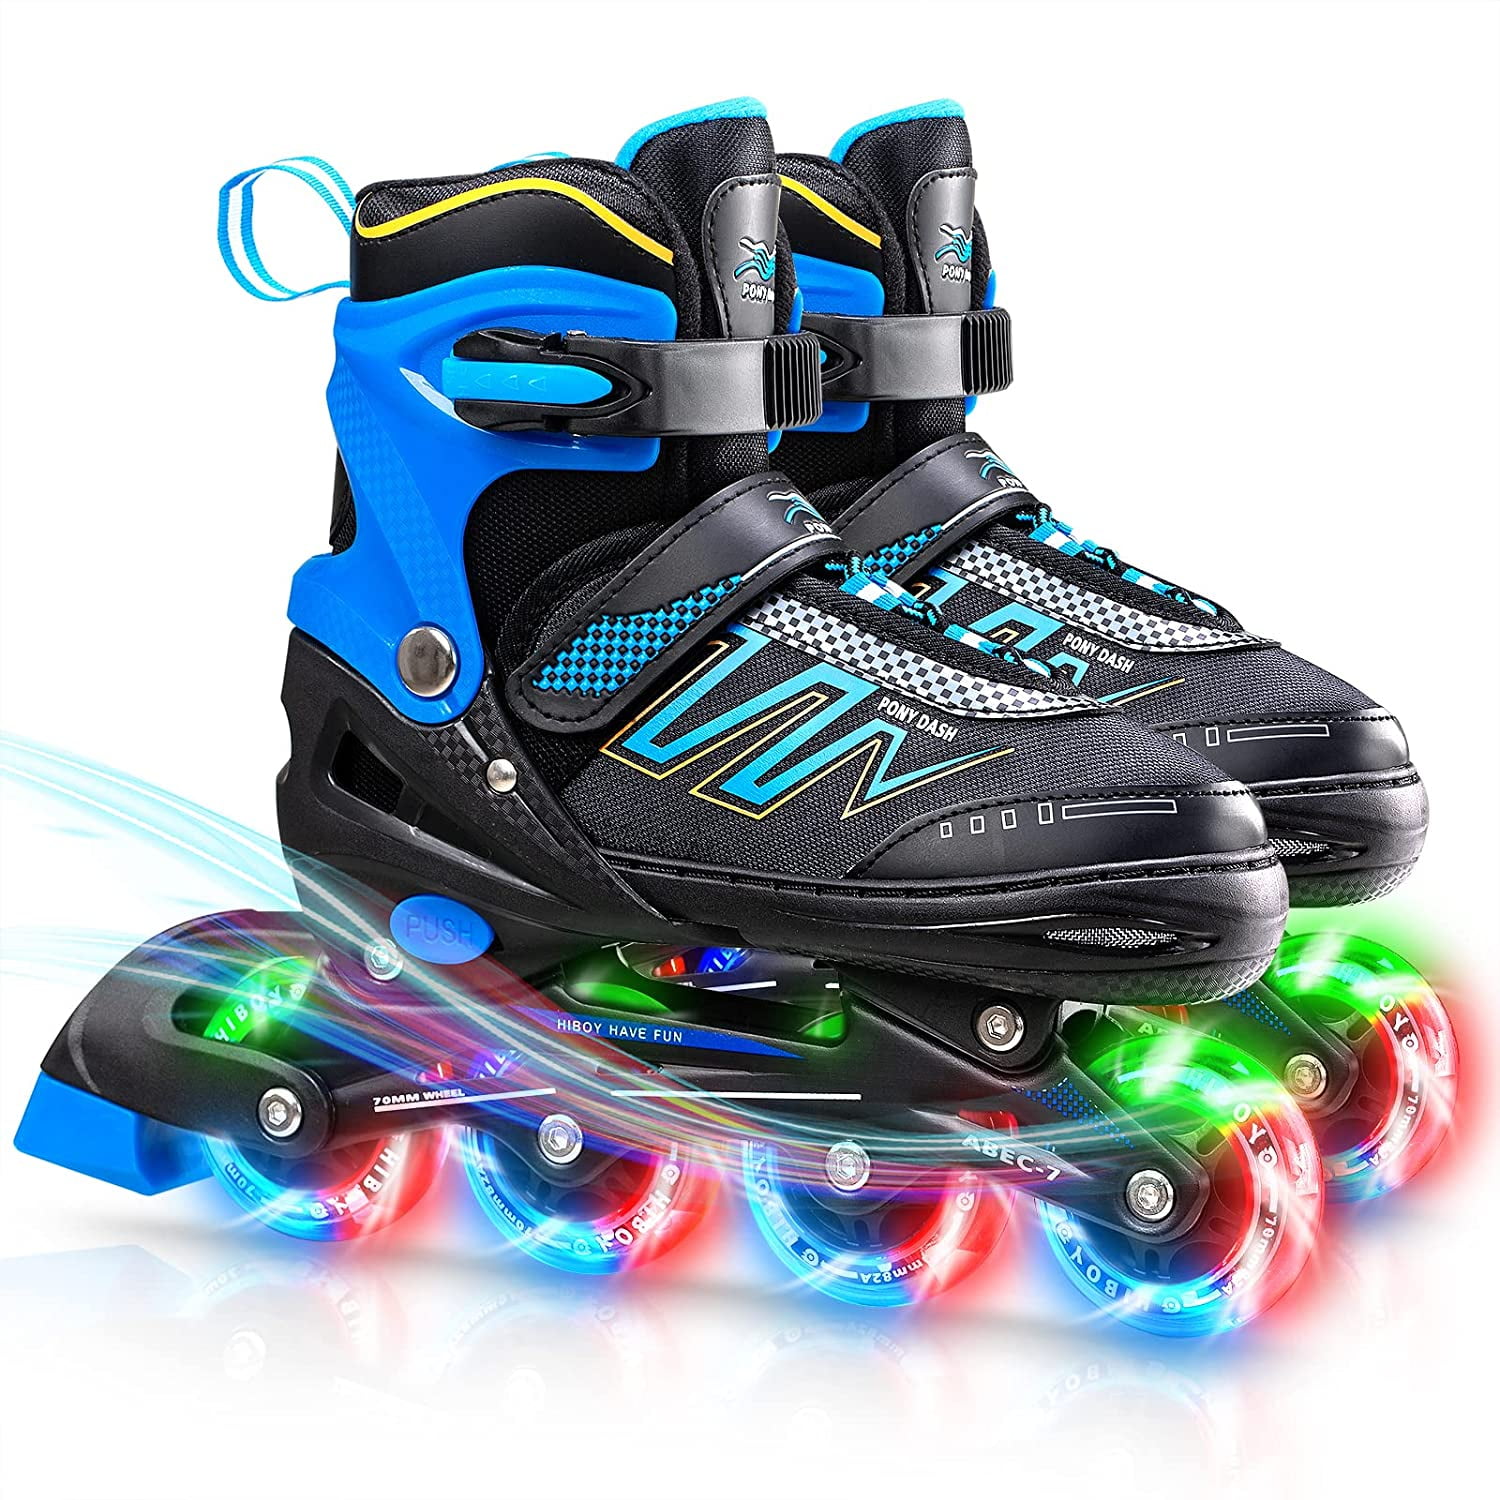 Details about   Kids Inline Skates Adjustable Suitable for Adults,Fun Flashing Roller Skates_NEW 